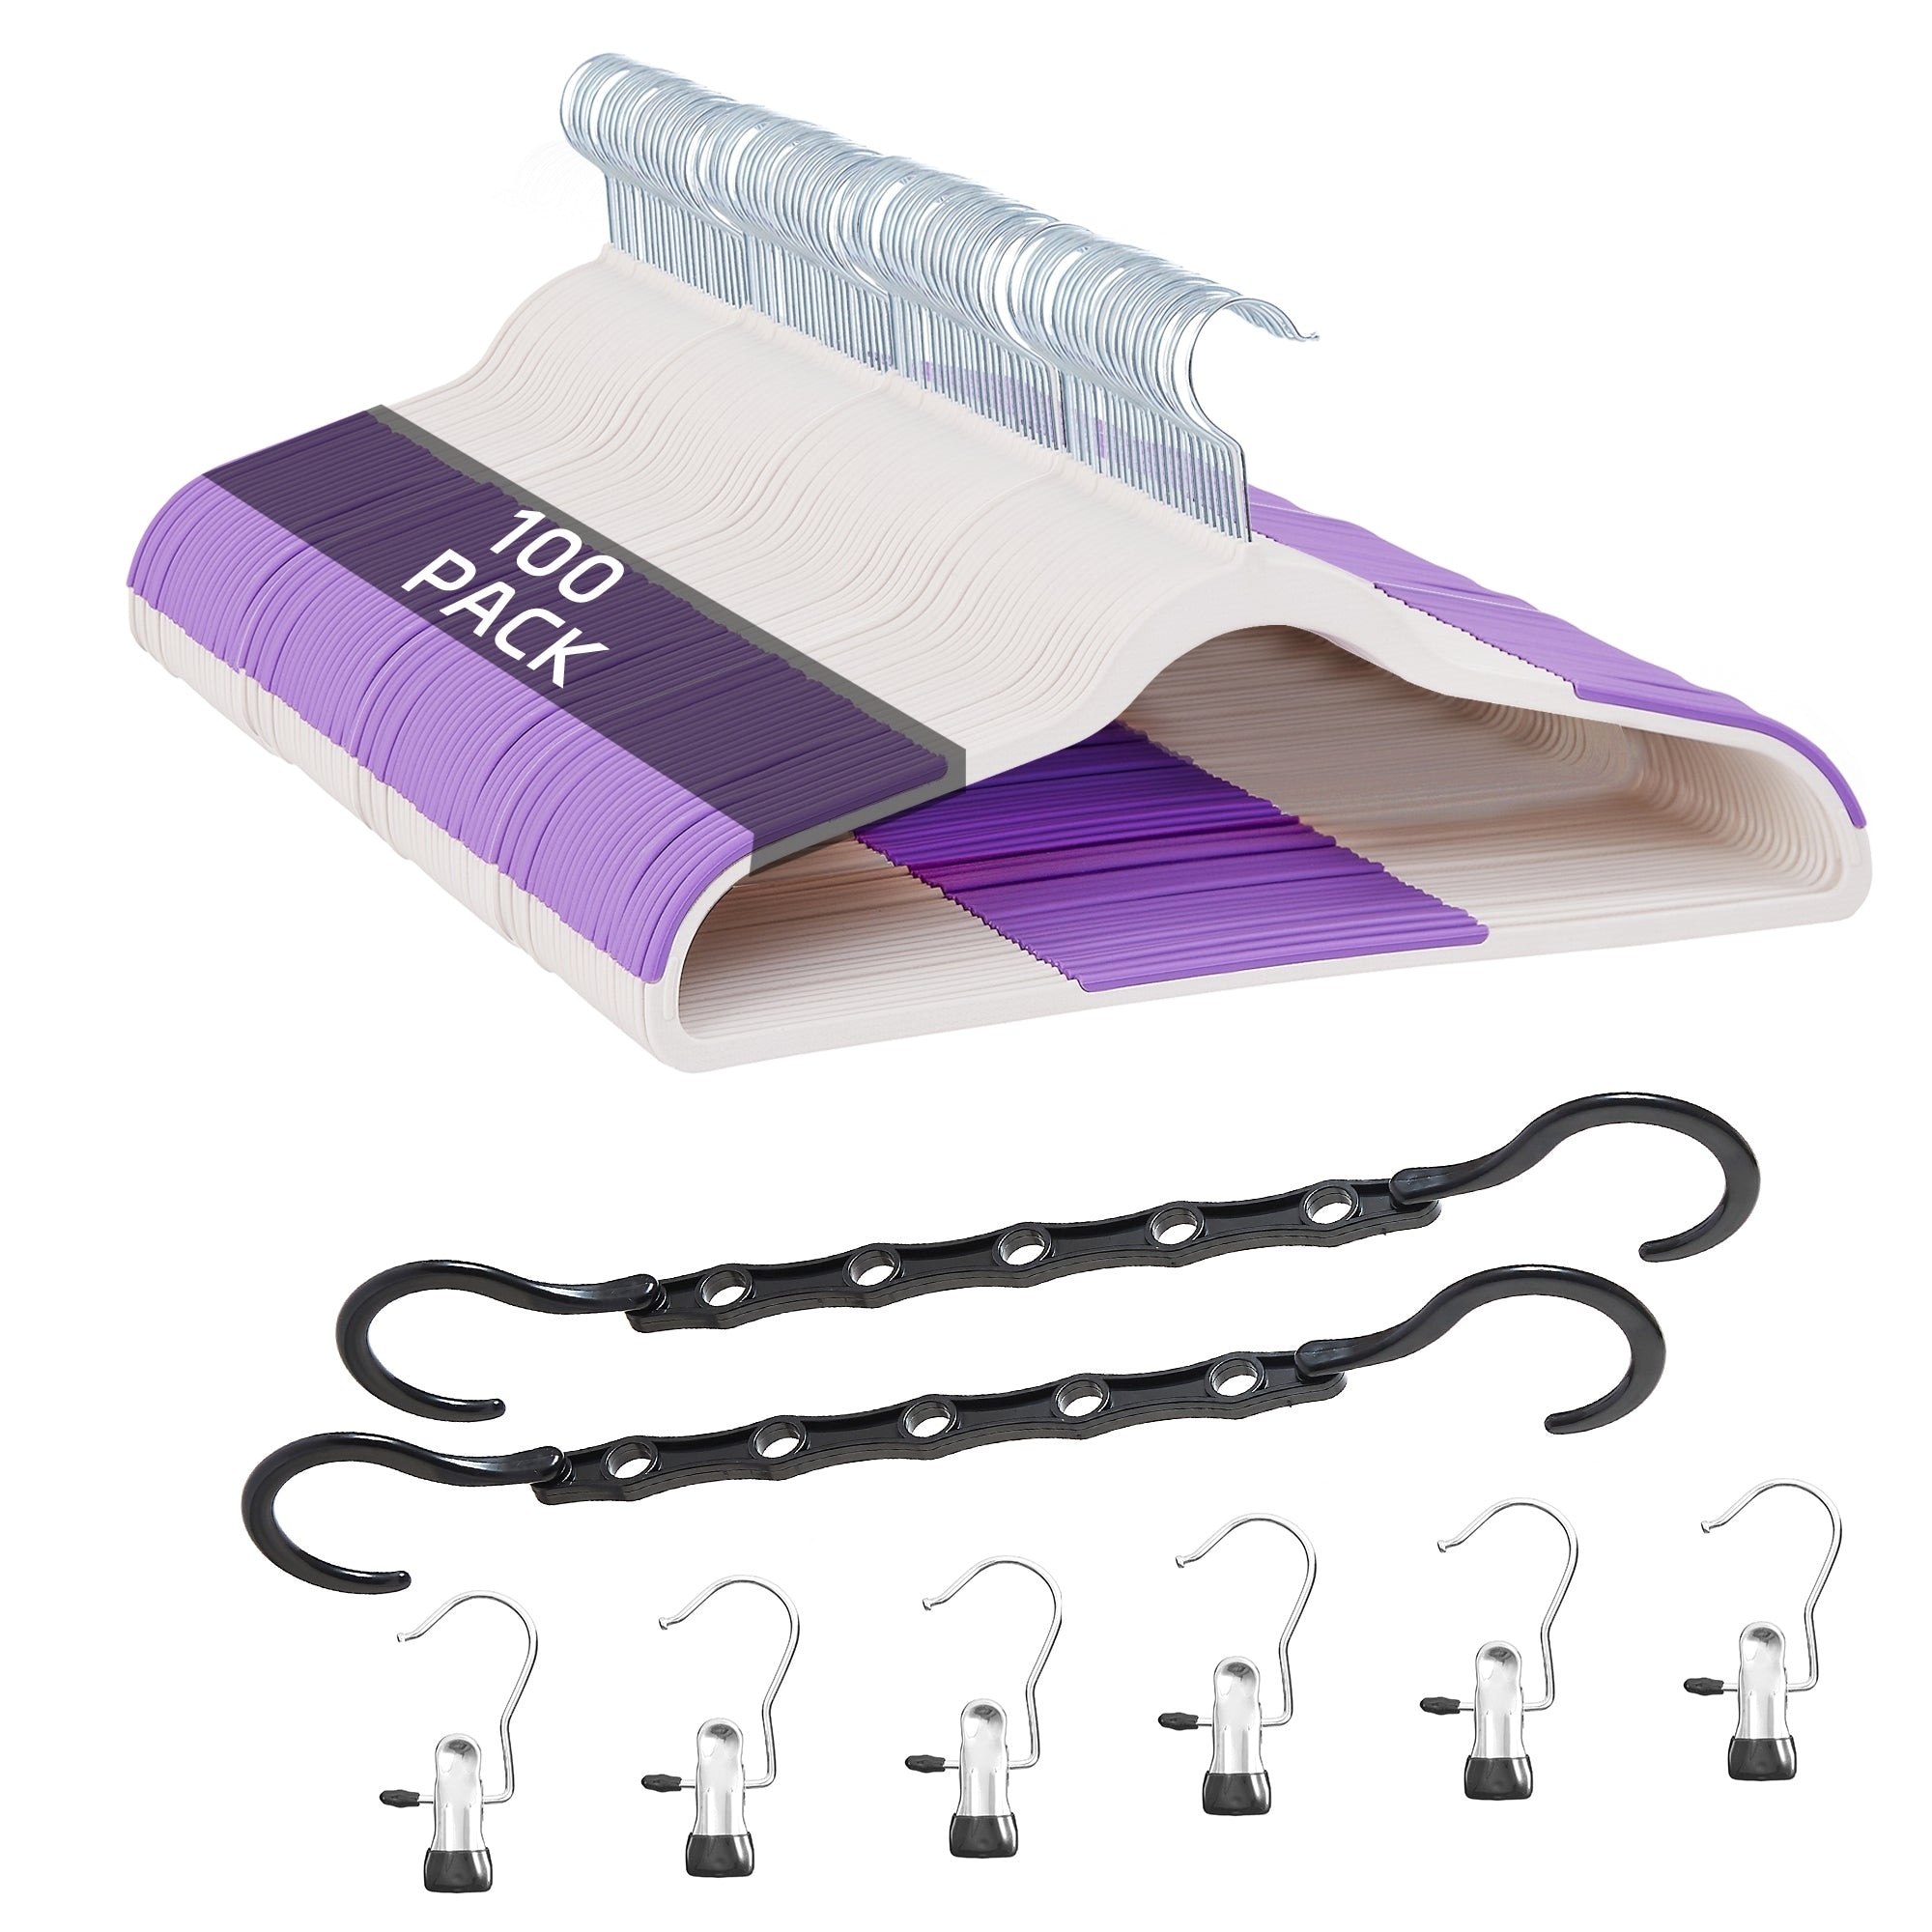 https://ak1.ostkcdn.com/images/products/is/images/direct/45fe9ef3131810552178c5478b030569f6e7b879/100-Pack-Clothes-Hangers-Plastic-Coat-Hangers-Non-Slip-Space-Saving-Swivel-Hook.jpg